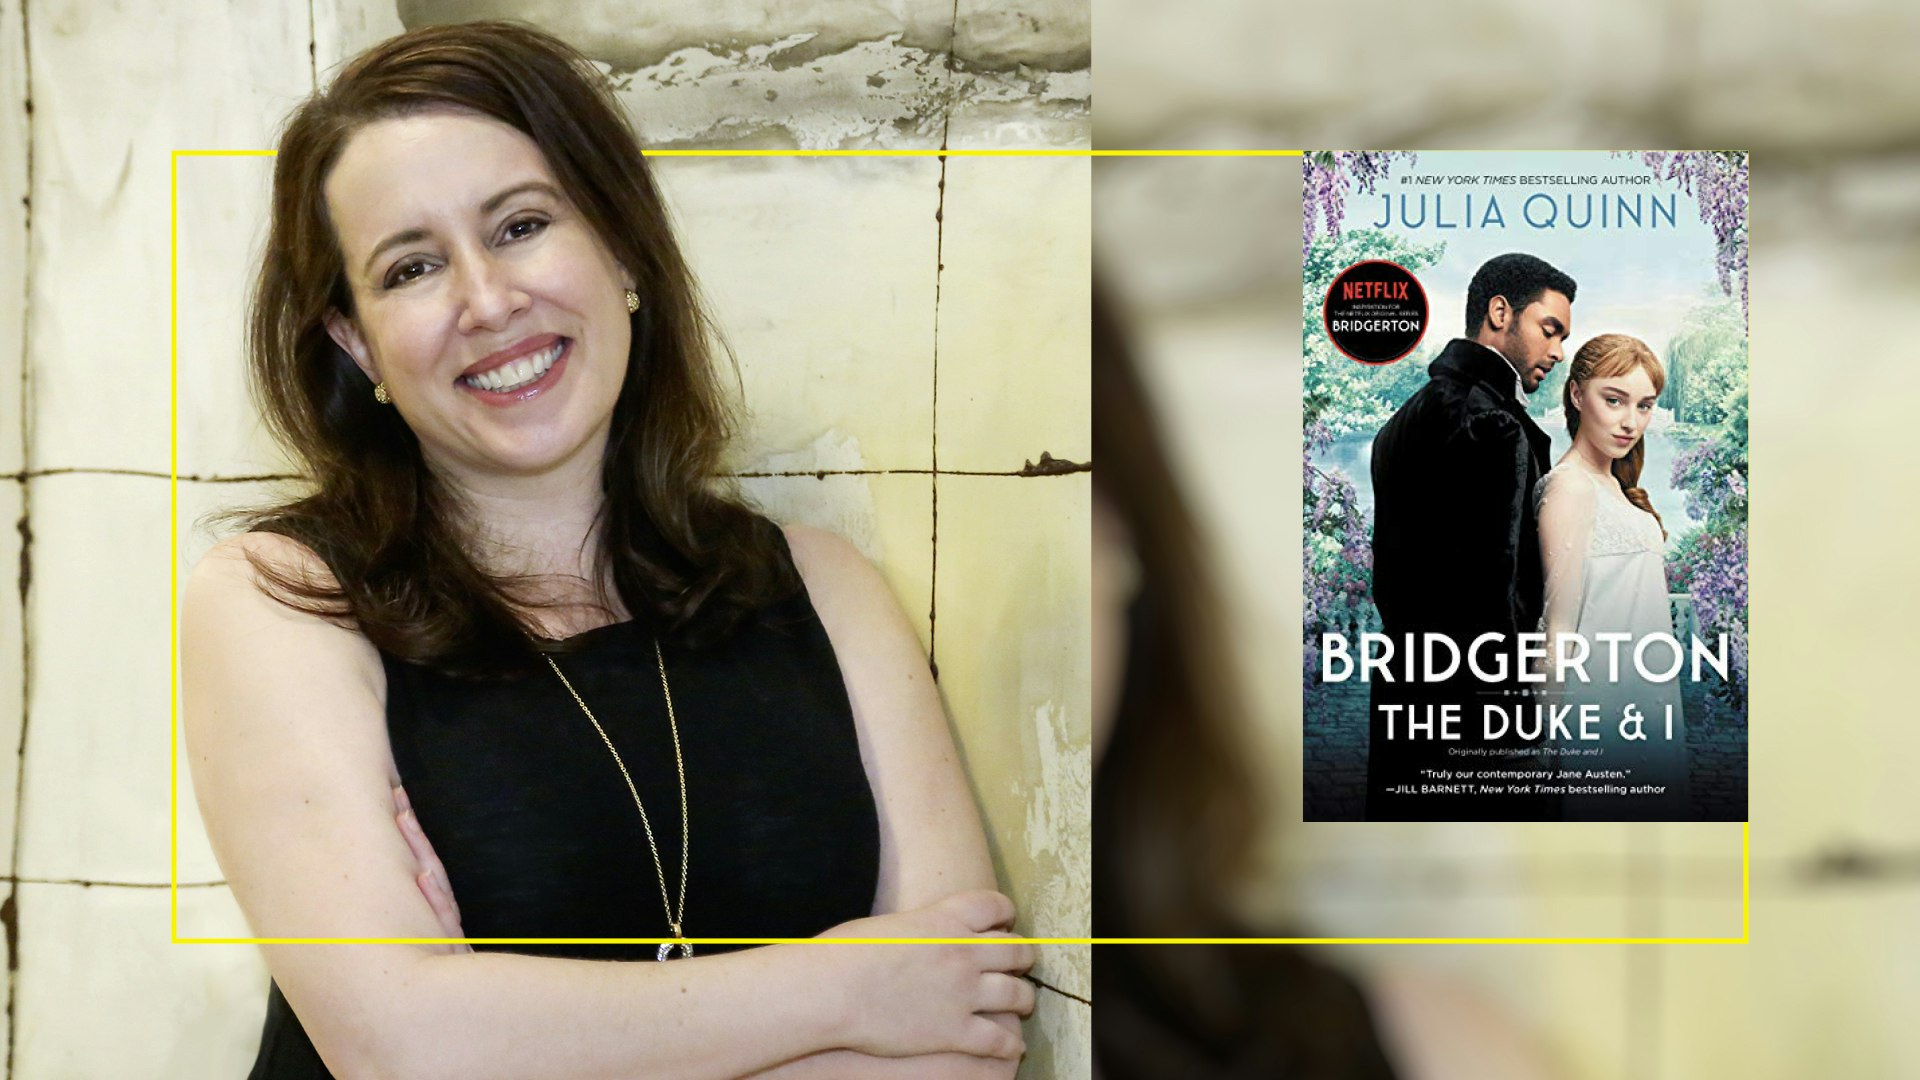 Bridgerton' Author Julia Quinn and Her Husband's Love Is Perfect